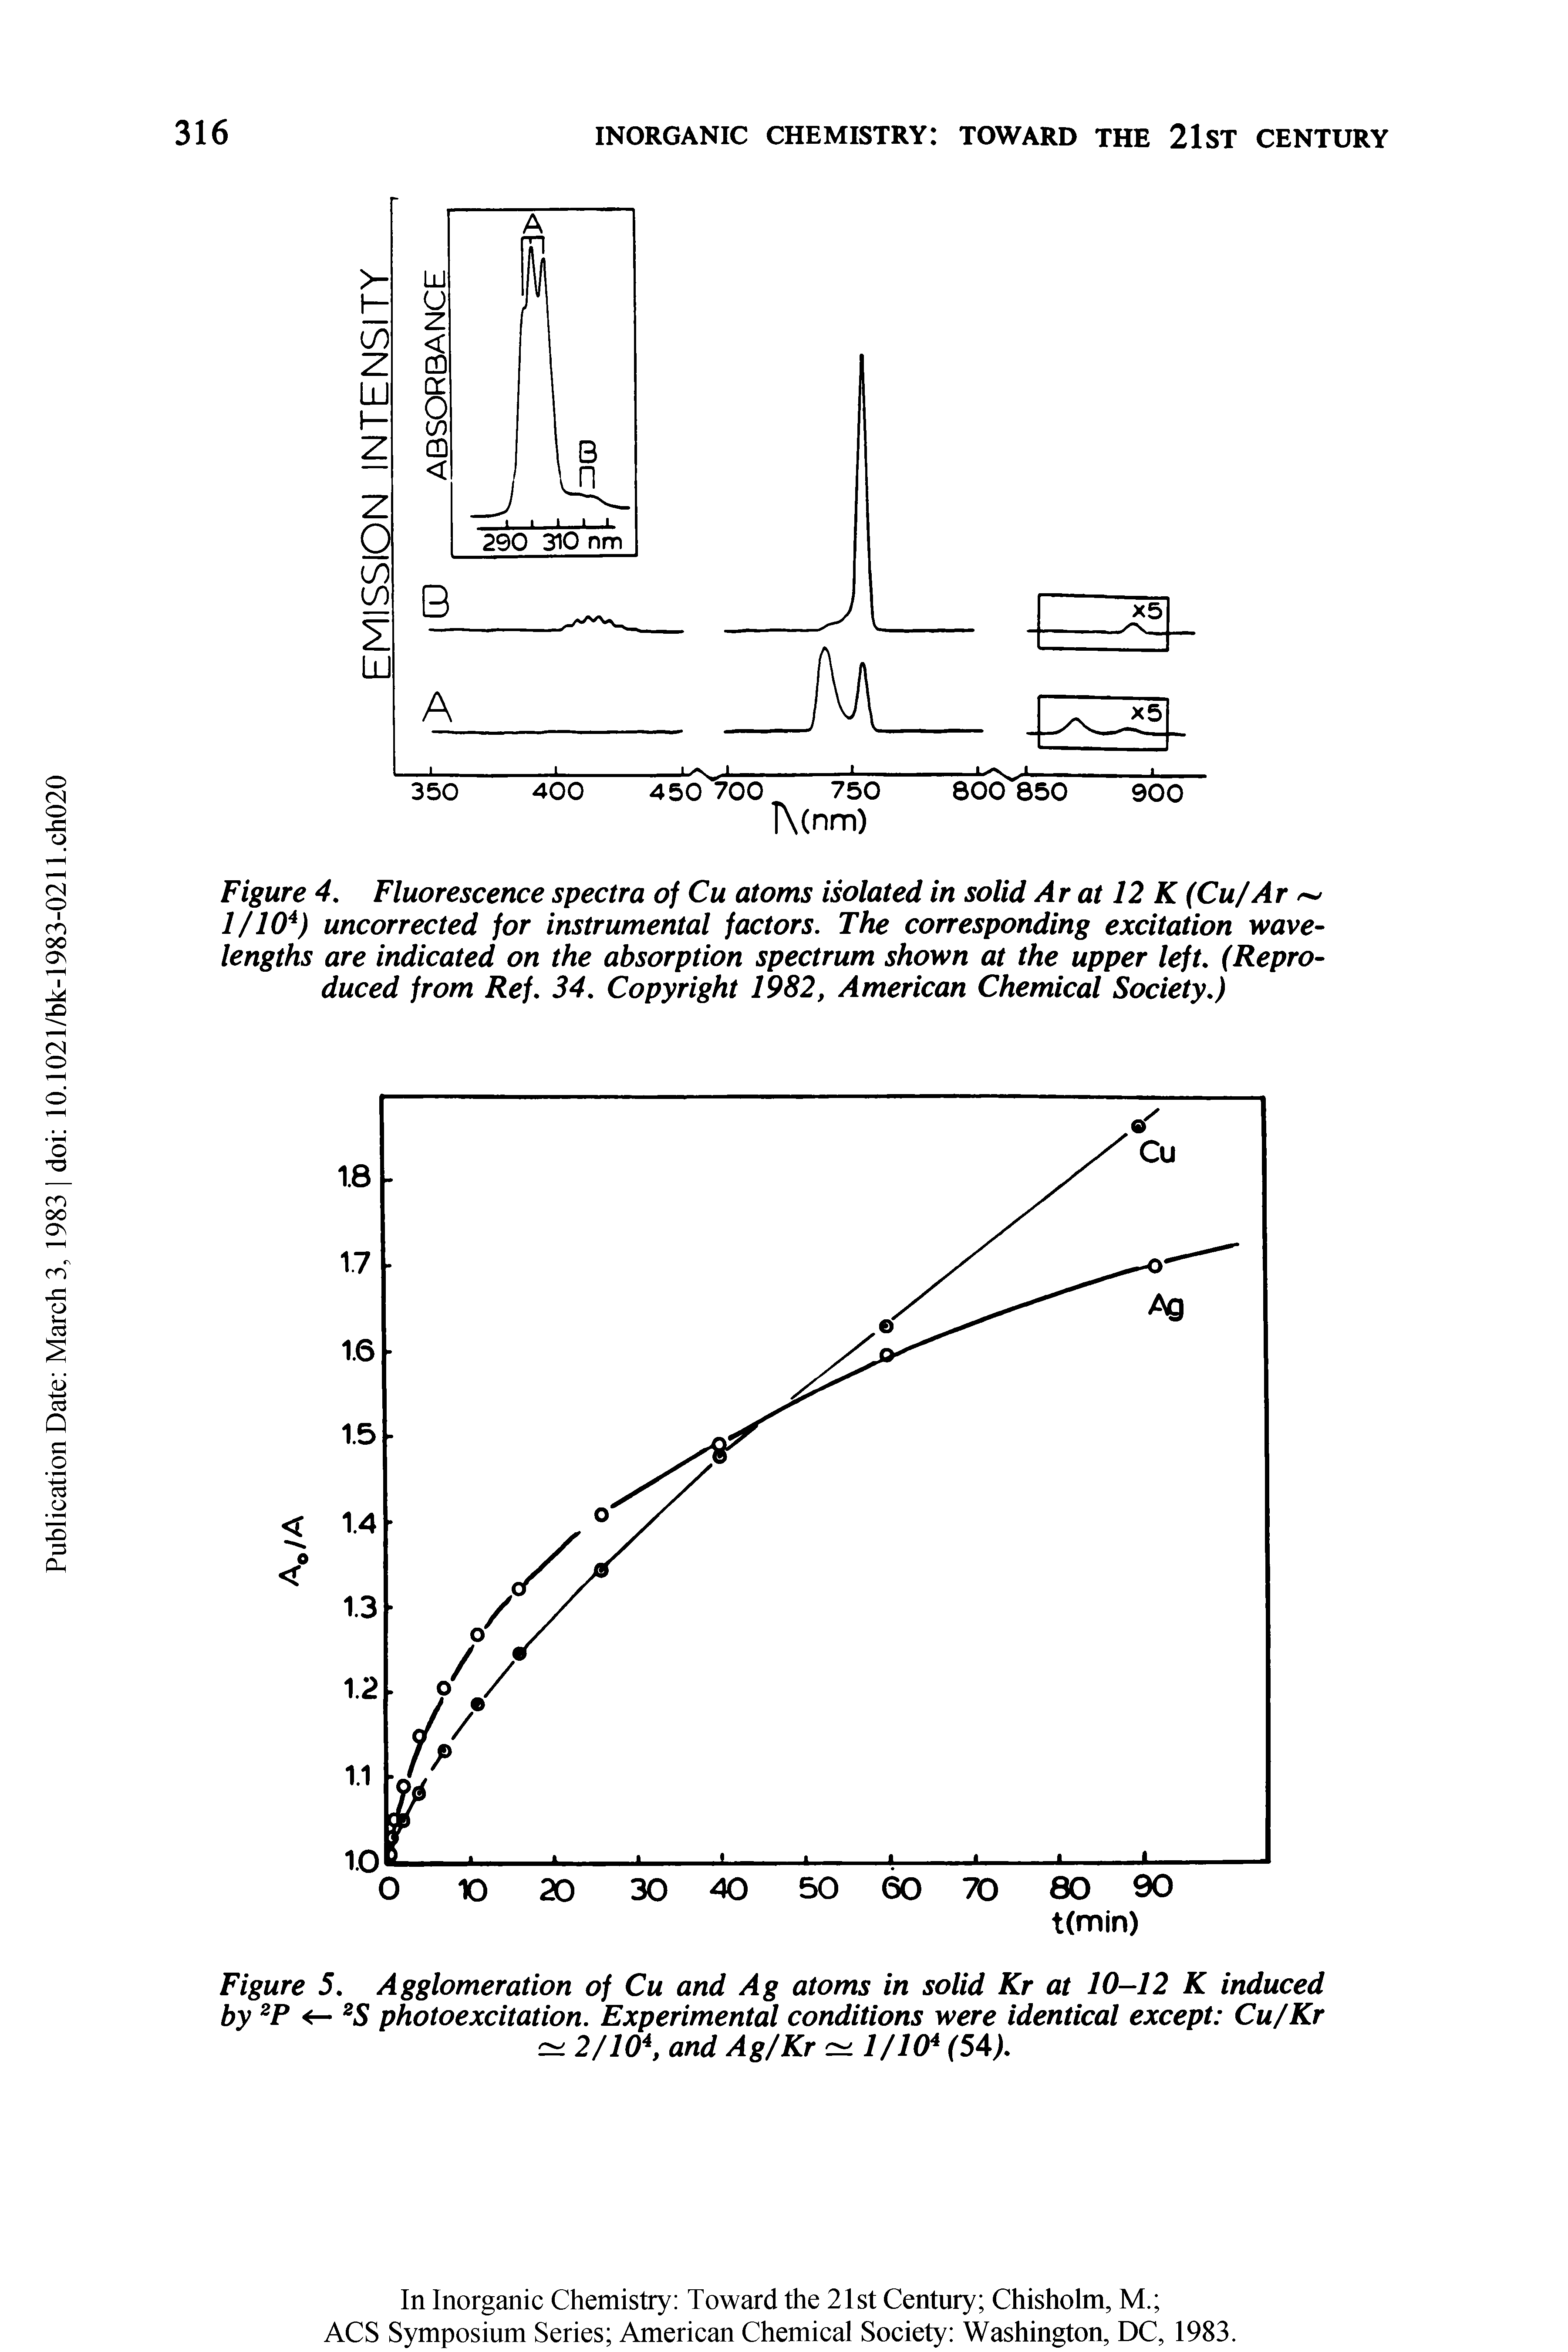 Figure 4. Fluorescence spectra of Cu atoms isolated in solid Ar at 12 K (Cu/Ar 1/104) uncorrected for instrumental factors. The corresponding excitation wavelengths are indicated on the absorption spectrum shown at the upper left. (Reproduced from Ref. 34. Copyright 1982, American Chemical Society.)...